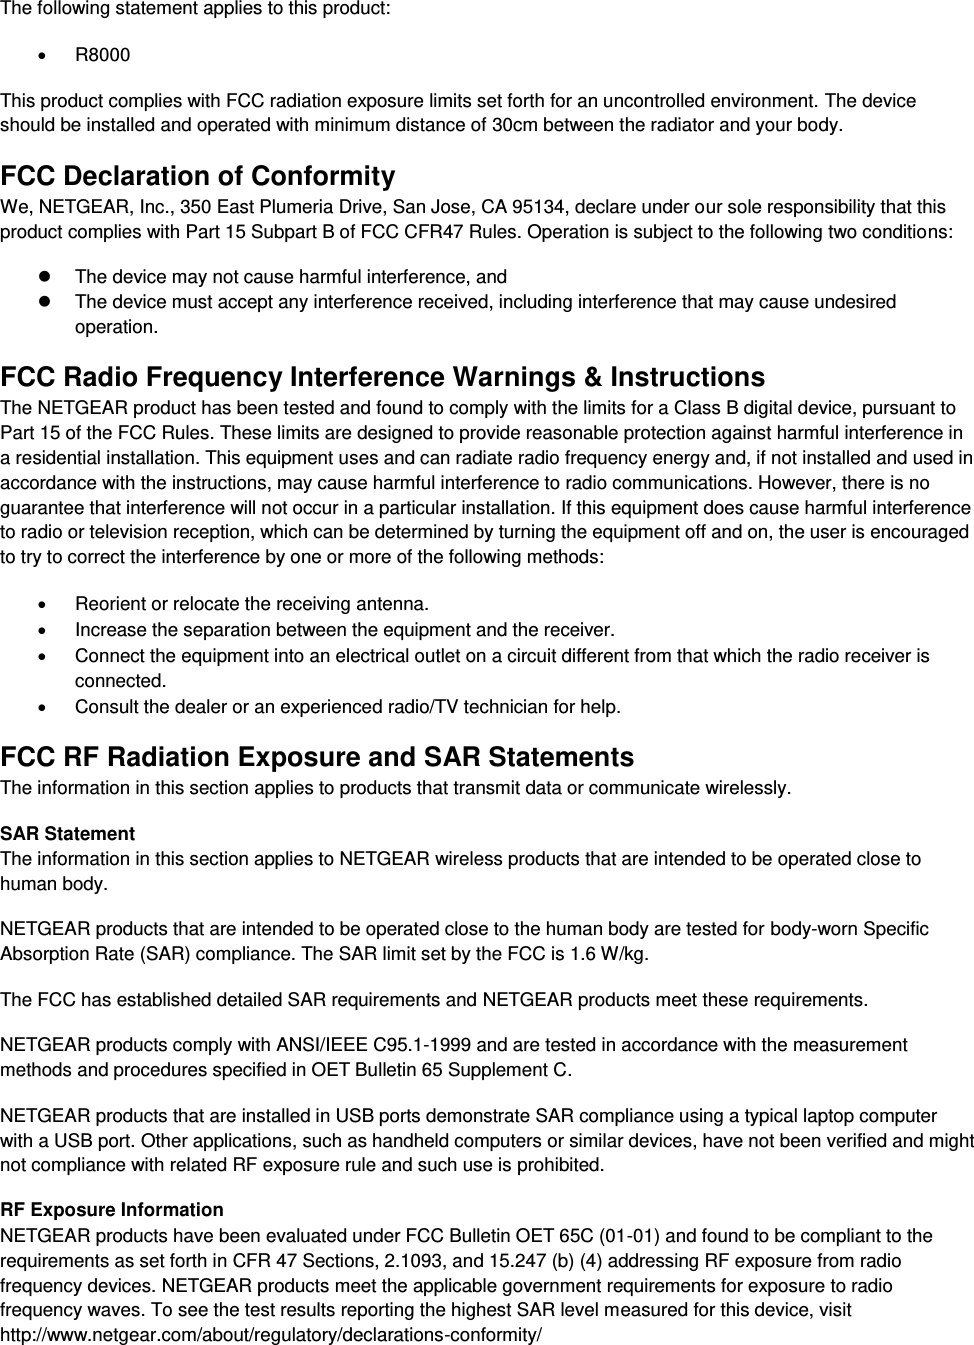  The following statement applies to this product:   R8000 This product complies with FCC radiation exposure limits set forth for an uncontrolled environment. The device should be installed and operated with minimum distance of 30cm between the radiator and your body. FCC Declaration of Conformity We, NETGEAR, Inc., 350 East Plumeria Drive, San Jose, CA 95134, declare under our sole responsibility that this product complies with Part 15 Subpart B of FCC CFR47 Rules. Operation is subject to the following two conditions:   The device may not cause harmful interference, and   The device must accept any interference received, including interference that may cause undesired operation. FCC Radio Frequency Interference Warnings &amp; Instructions The NETGEAR product has been tested and found to comply with the limits for a Class B digital device, pursuant to Part 15 of the FCC Rules. These limits are designed to provide reasonable protection against harmful interference in a residential installation. This equipment uses and can radiate radio frequency energy and, if not installed and used in accordance with the instructions, may cause harmful interference to radio communications. However, there is no guarantee that interference will not occur in a particular installation. If this equipment does cause harmful interference to radio or television reception, which can be determined by turning the equipment off and on, the user is encouraged to try to correct the interference by one or more of the following methods:   Reorient or relocate the receiving antenna.   Increase the separation between the equipment and the receiver.   Connect the equipment into an electrical outlet on a circuit different from that which the radio receiver is connected.   Consult the dealer or an experienced radio/TV technician for help. FCC RF Radiation Exposure and SAR Statements The information in this section applies to products that transmit data or communicate wirelessly. SAR Statement The information in this section applies to NETGEAR wireless products that are intended to be operated close to human body.  NETGEAR products that are intended to be operated close to the human body are tested for body-worn Specific Absorption Rate (SAR) compliance. The SAR limit set by the FCC is 1.6 W/kg. The FCC has established detailed SAR requirements and NETGEAR products meet these requirements. NETGEAR products comply with ANSI/IEEE C95.1-1999 and are tested in accordance with the measurement methods and procedures specified in OET Bulletin 65 Supplement C. NETGEAR products that are installed in USB ports demonstrate SAR compliance using a typical laptop computer with a USB port. Other applications, such as handheld computers or similar devices, have not been verified and might not compliance with related RF exposure rule and such use is prohibited. RF Exposure Information NETGEAR products have been evaluated under FCC Bulletin OET 65C (01-01) and found to be compliant to the requirements as set forth in CFR 47 Sections, 2.1093, and 15.247 (b) (4) addressing RF exposure from radio frequency devices. NETGEAR products meet the applicable government requirements for exposure to radio frequency waves. To see the test results reporting the highest SAR level measured for this device, visit http://www.netgear.com/about/regulatory/declarations-conformity/ 